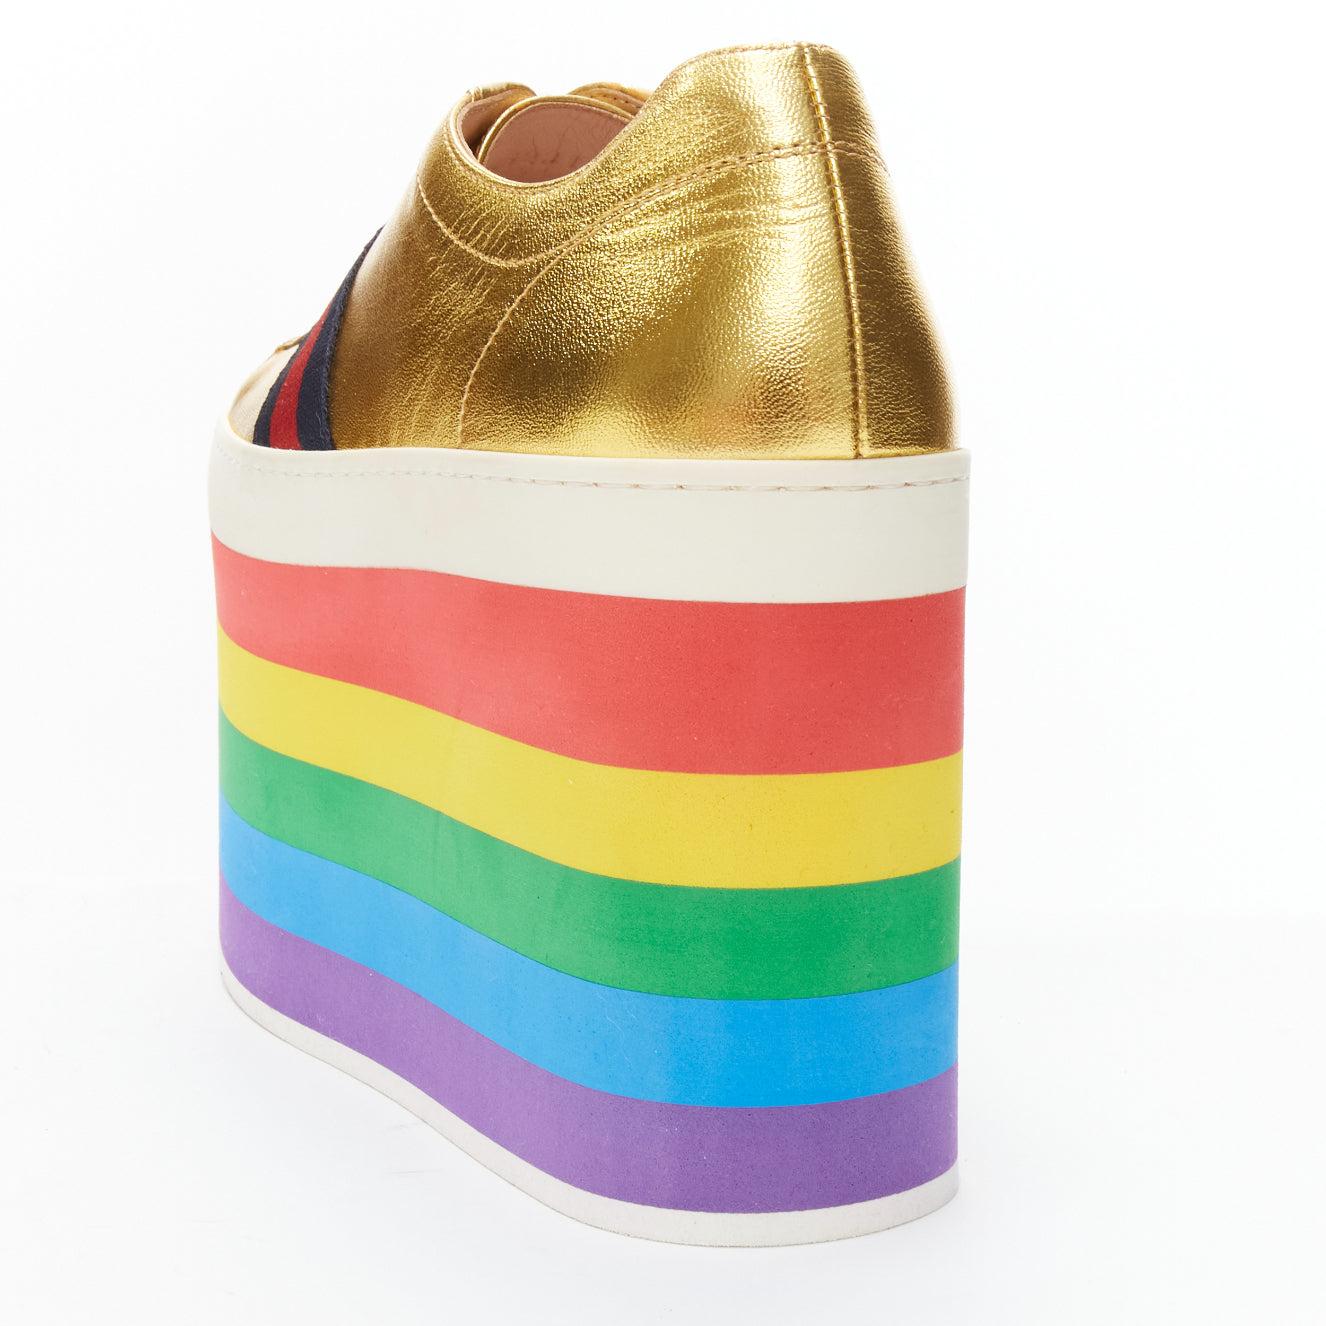 GUCCI Alessandro Michele Peggy rainbow gold web platform sneakers EU37.5 For Sale 3